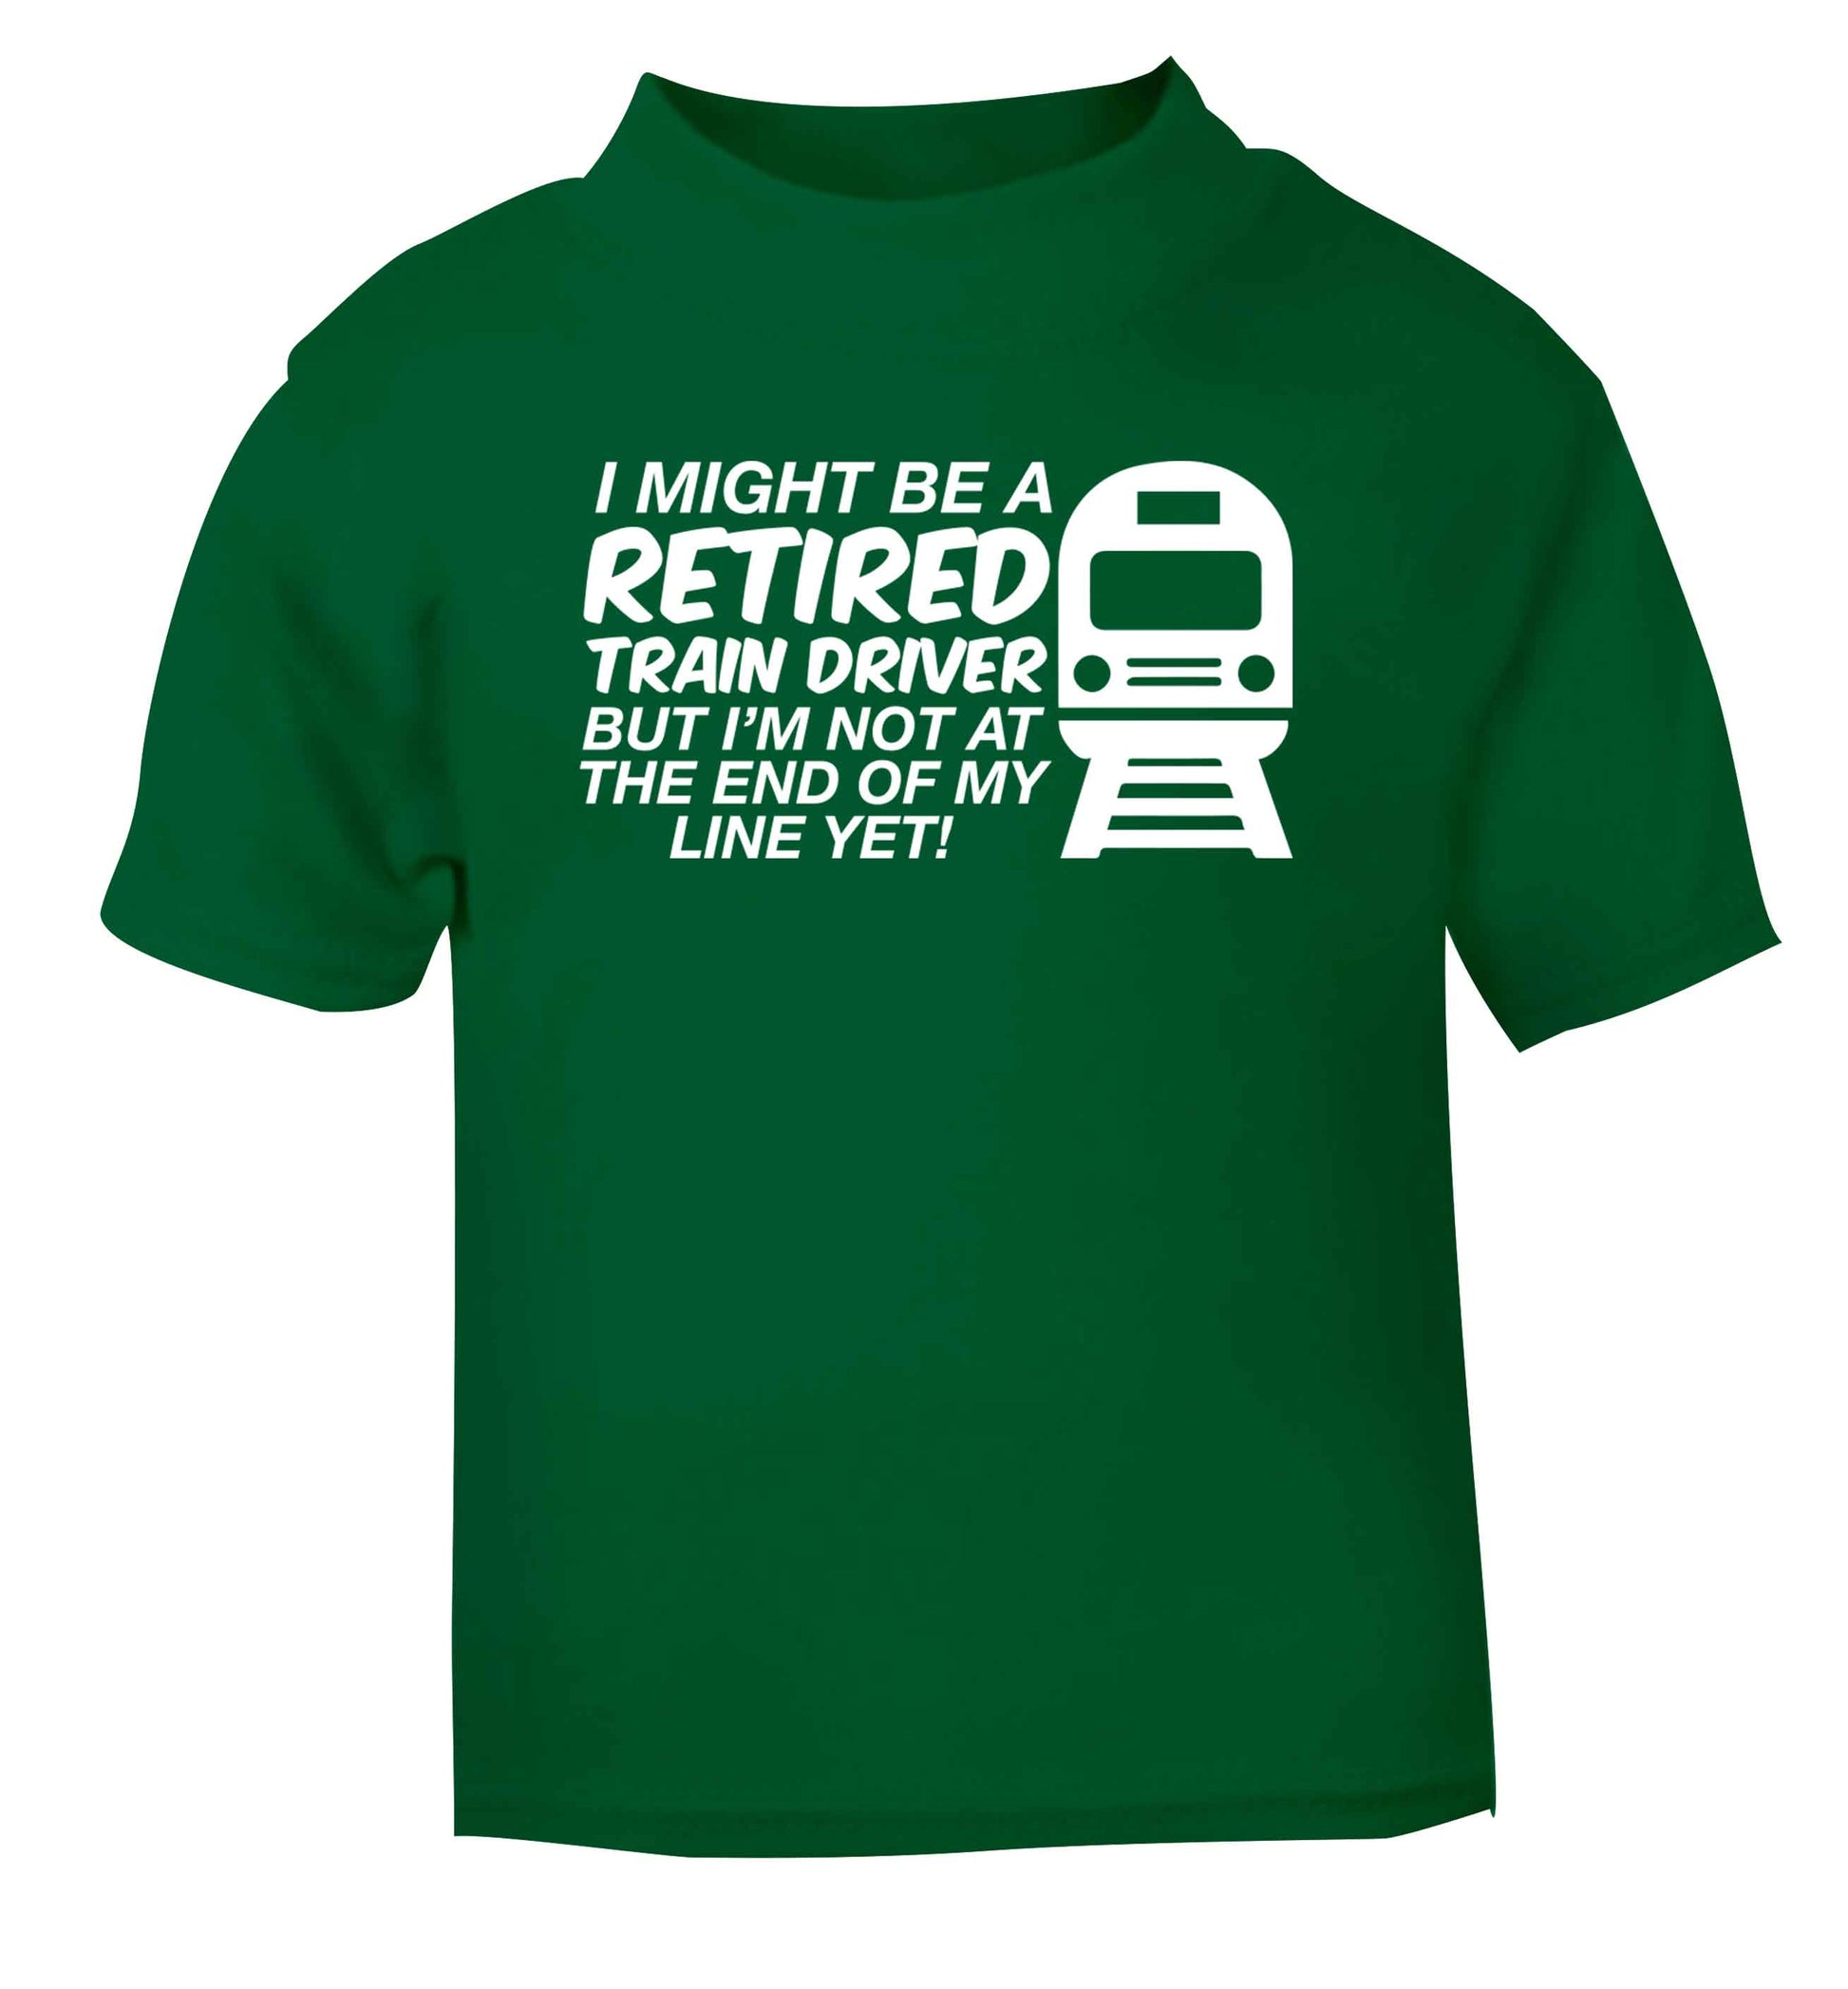 Retired train driver but I'm not at the end of my line yet green Baby Toddler Tshirt 2 Years